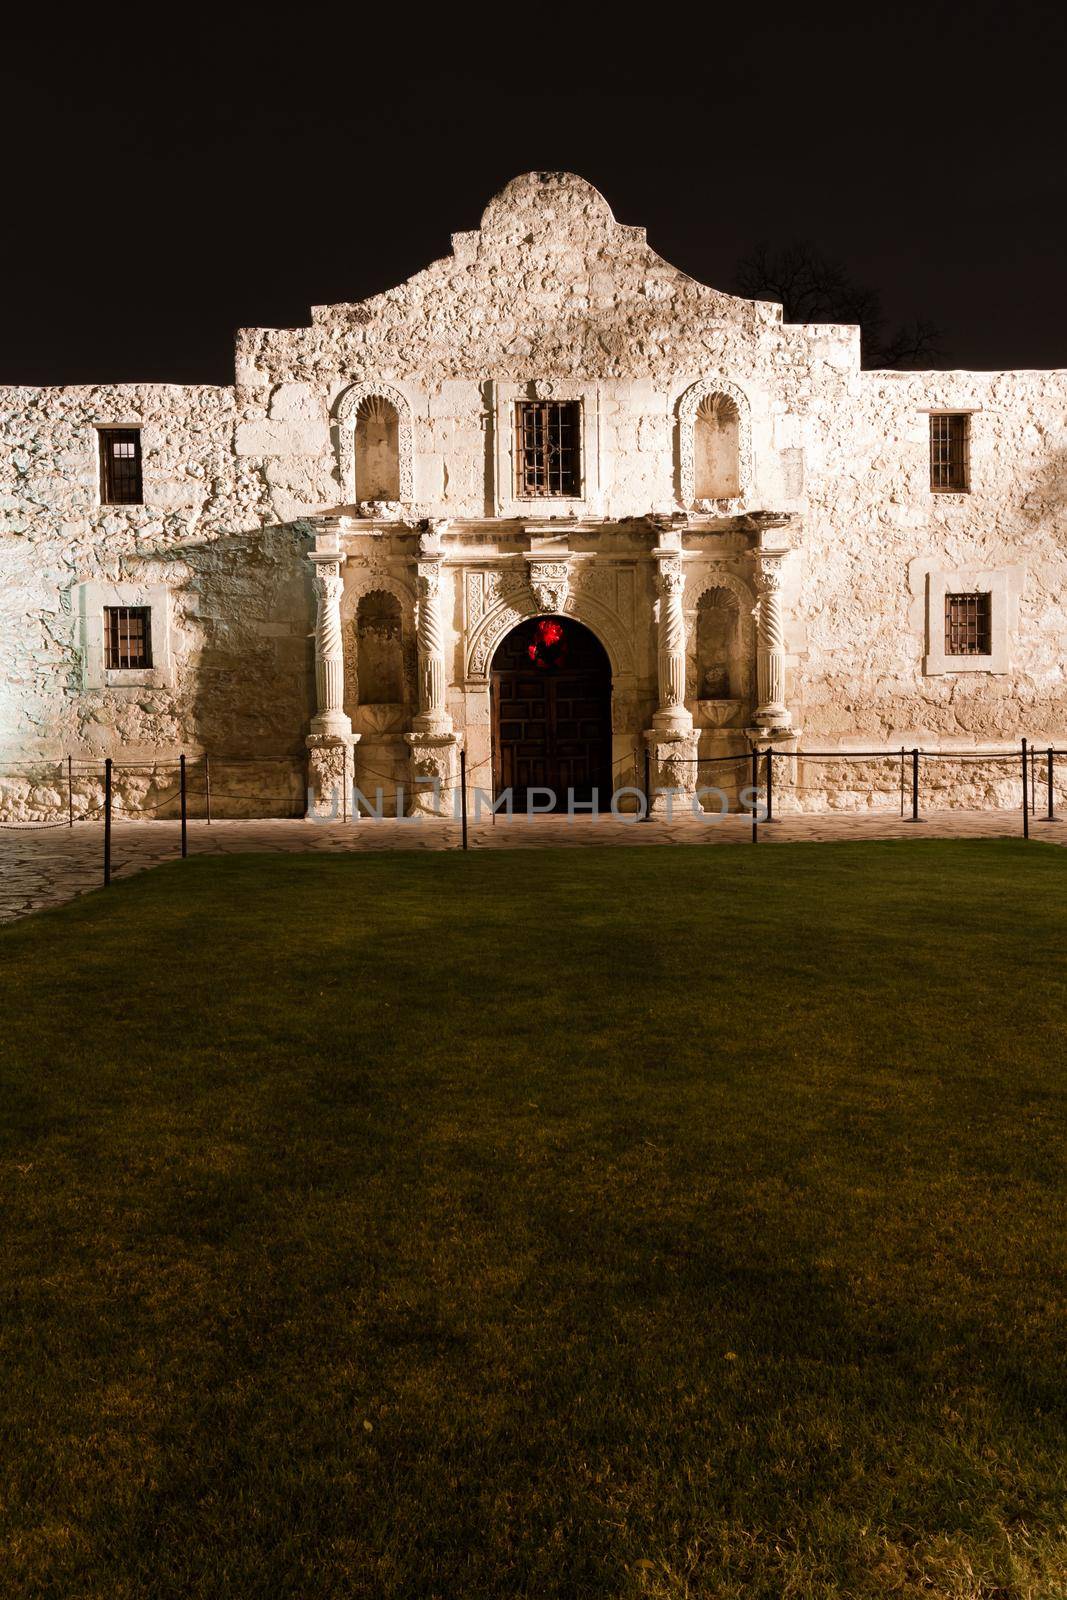 The Alamo mission in San Antonio Missions National park , Texas